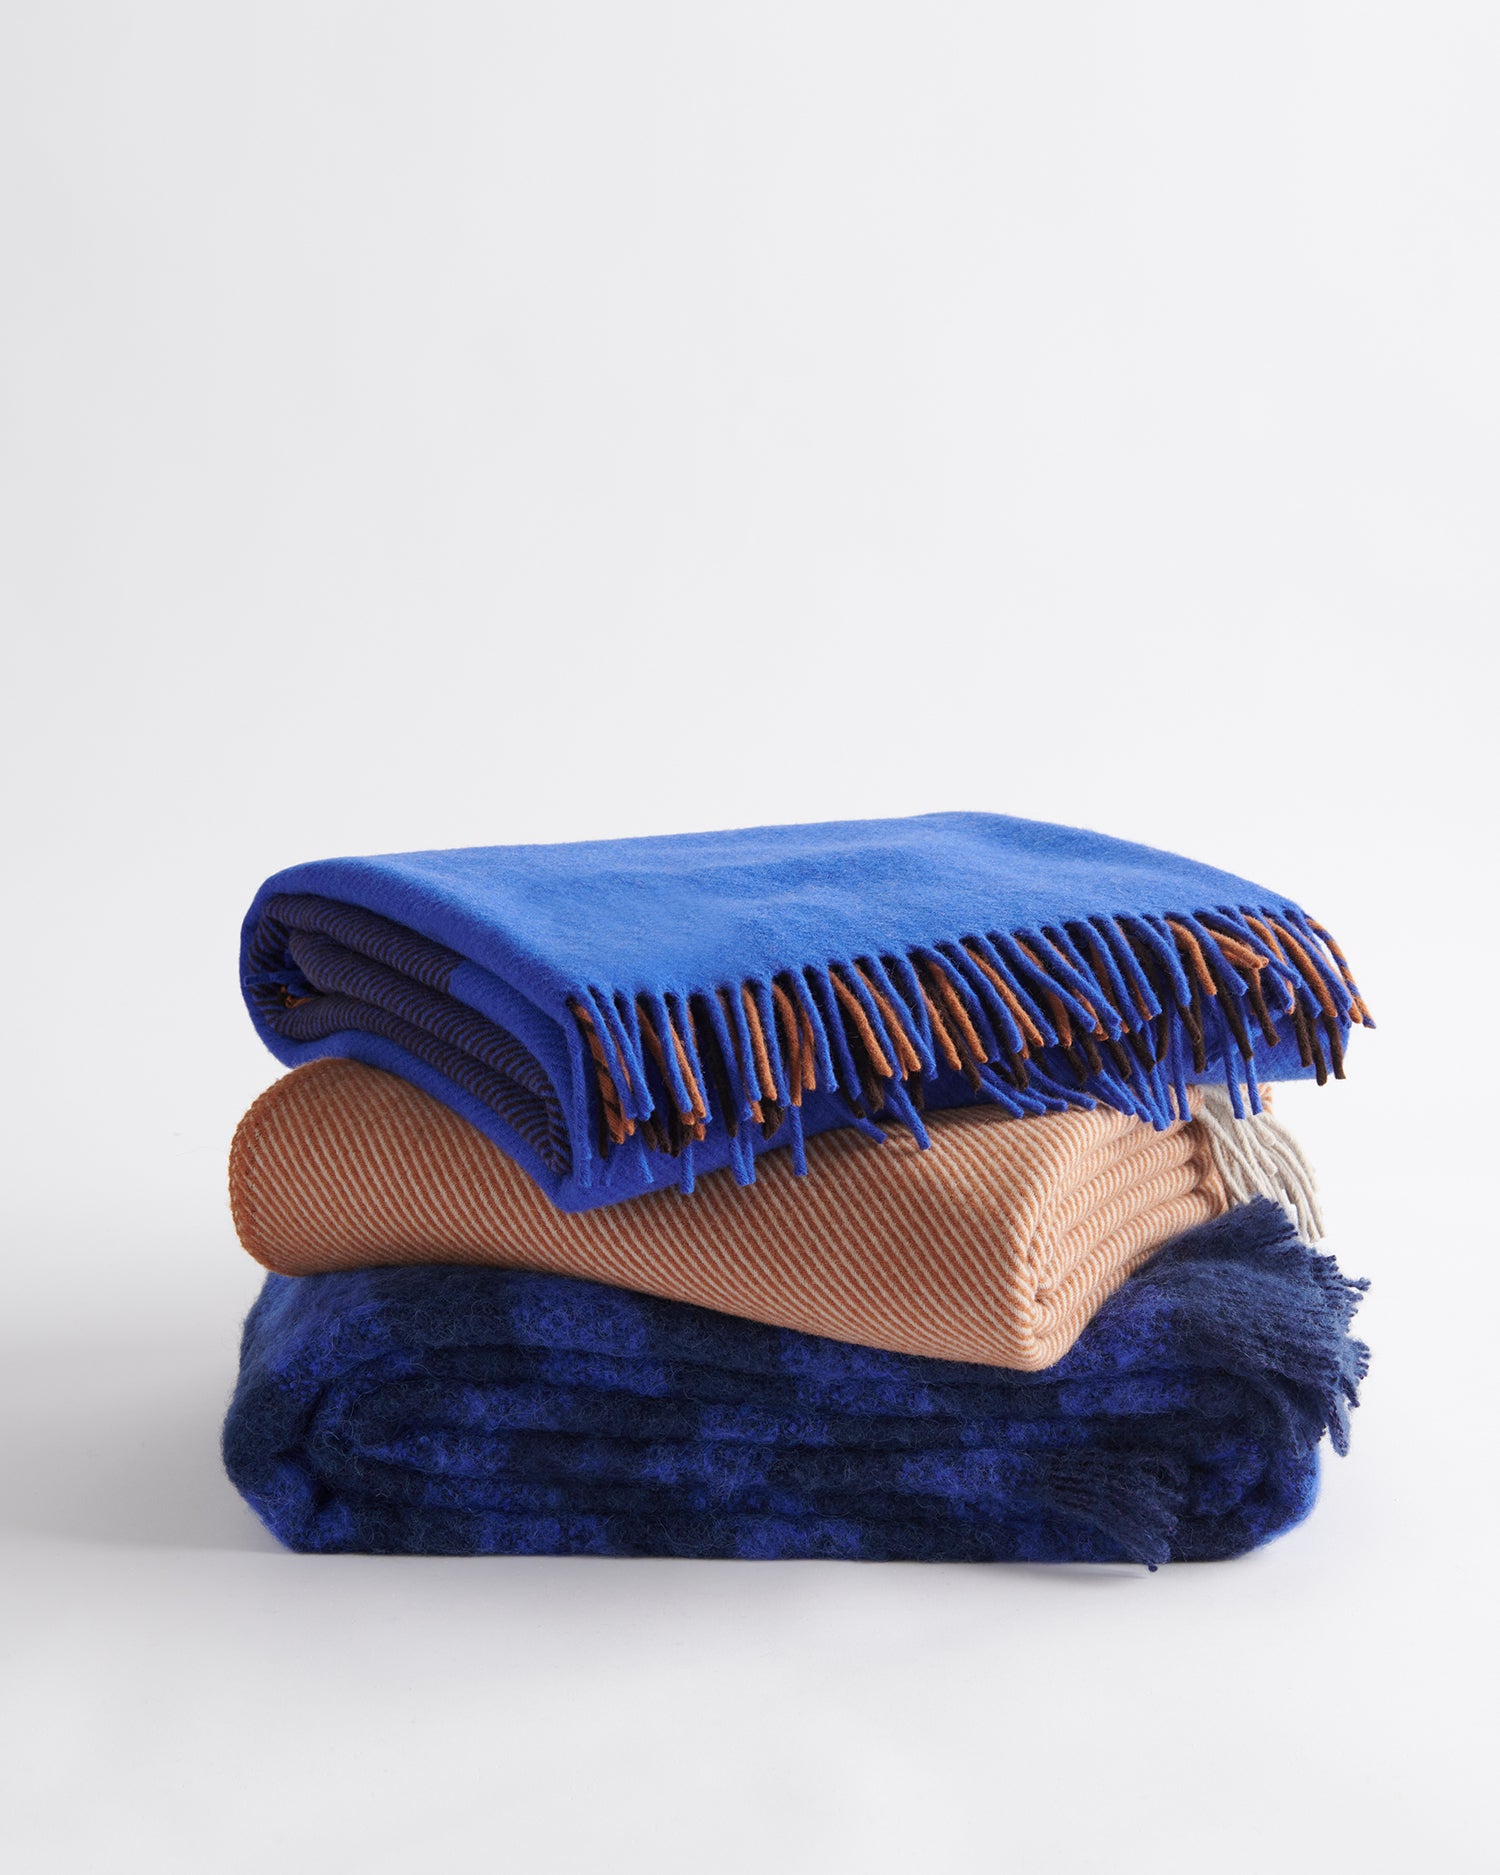 A stack of three complementary throws; gem in cobalt, diagonal in terracotta, rift in cobalt.